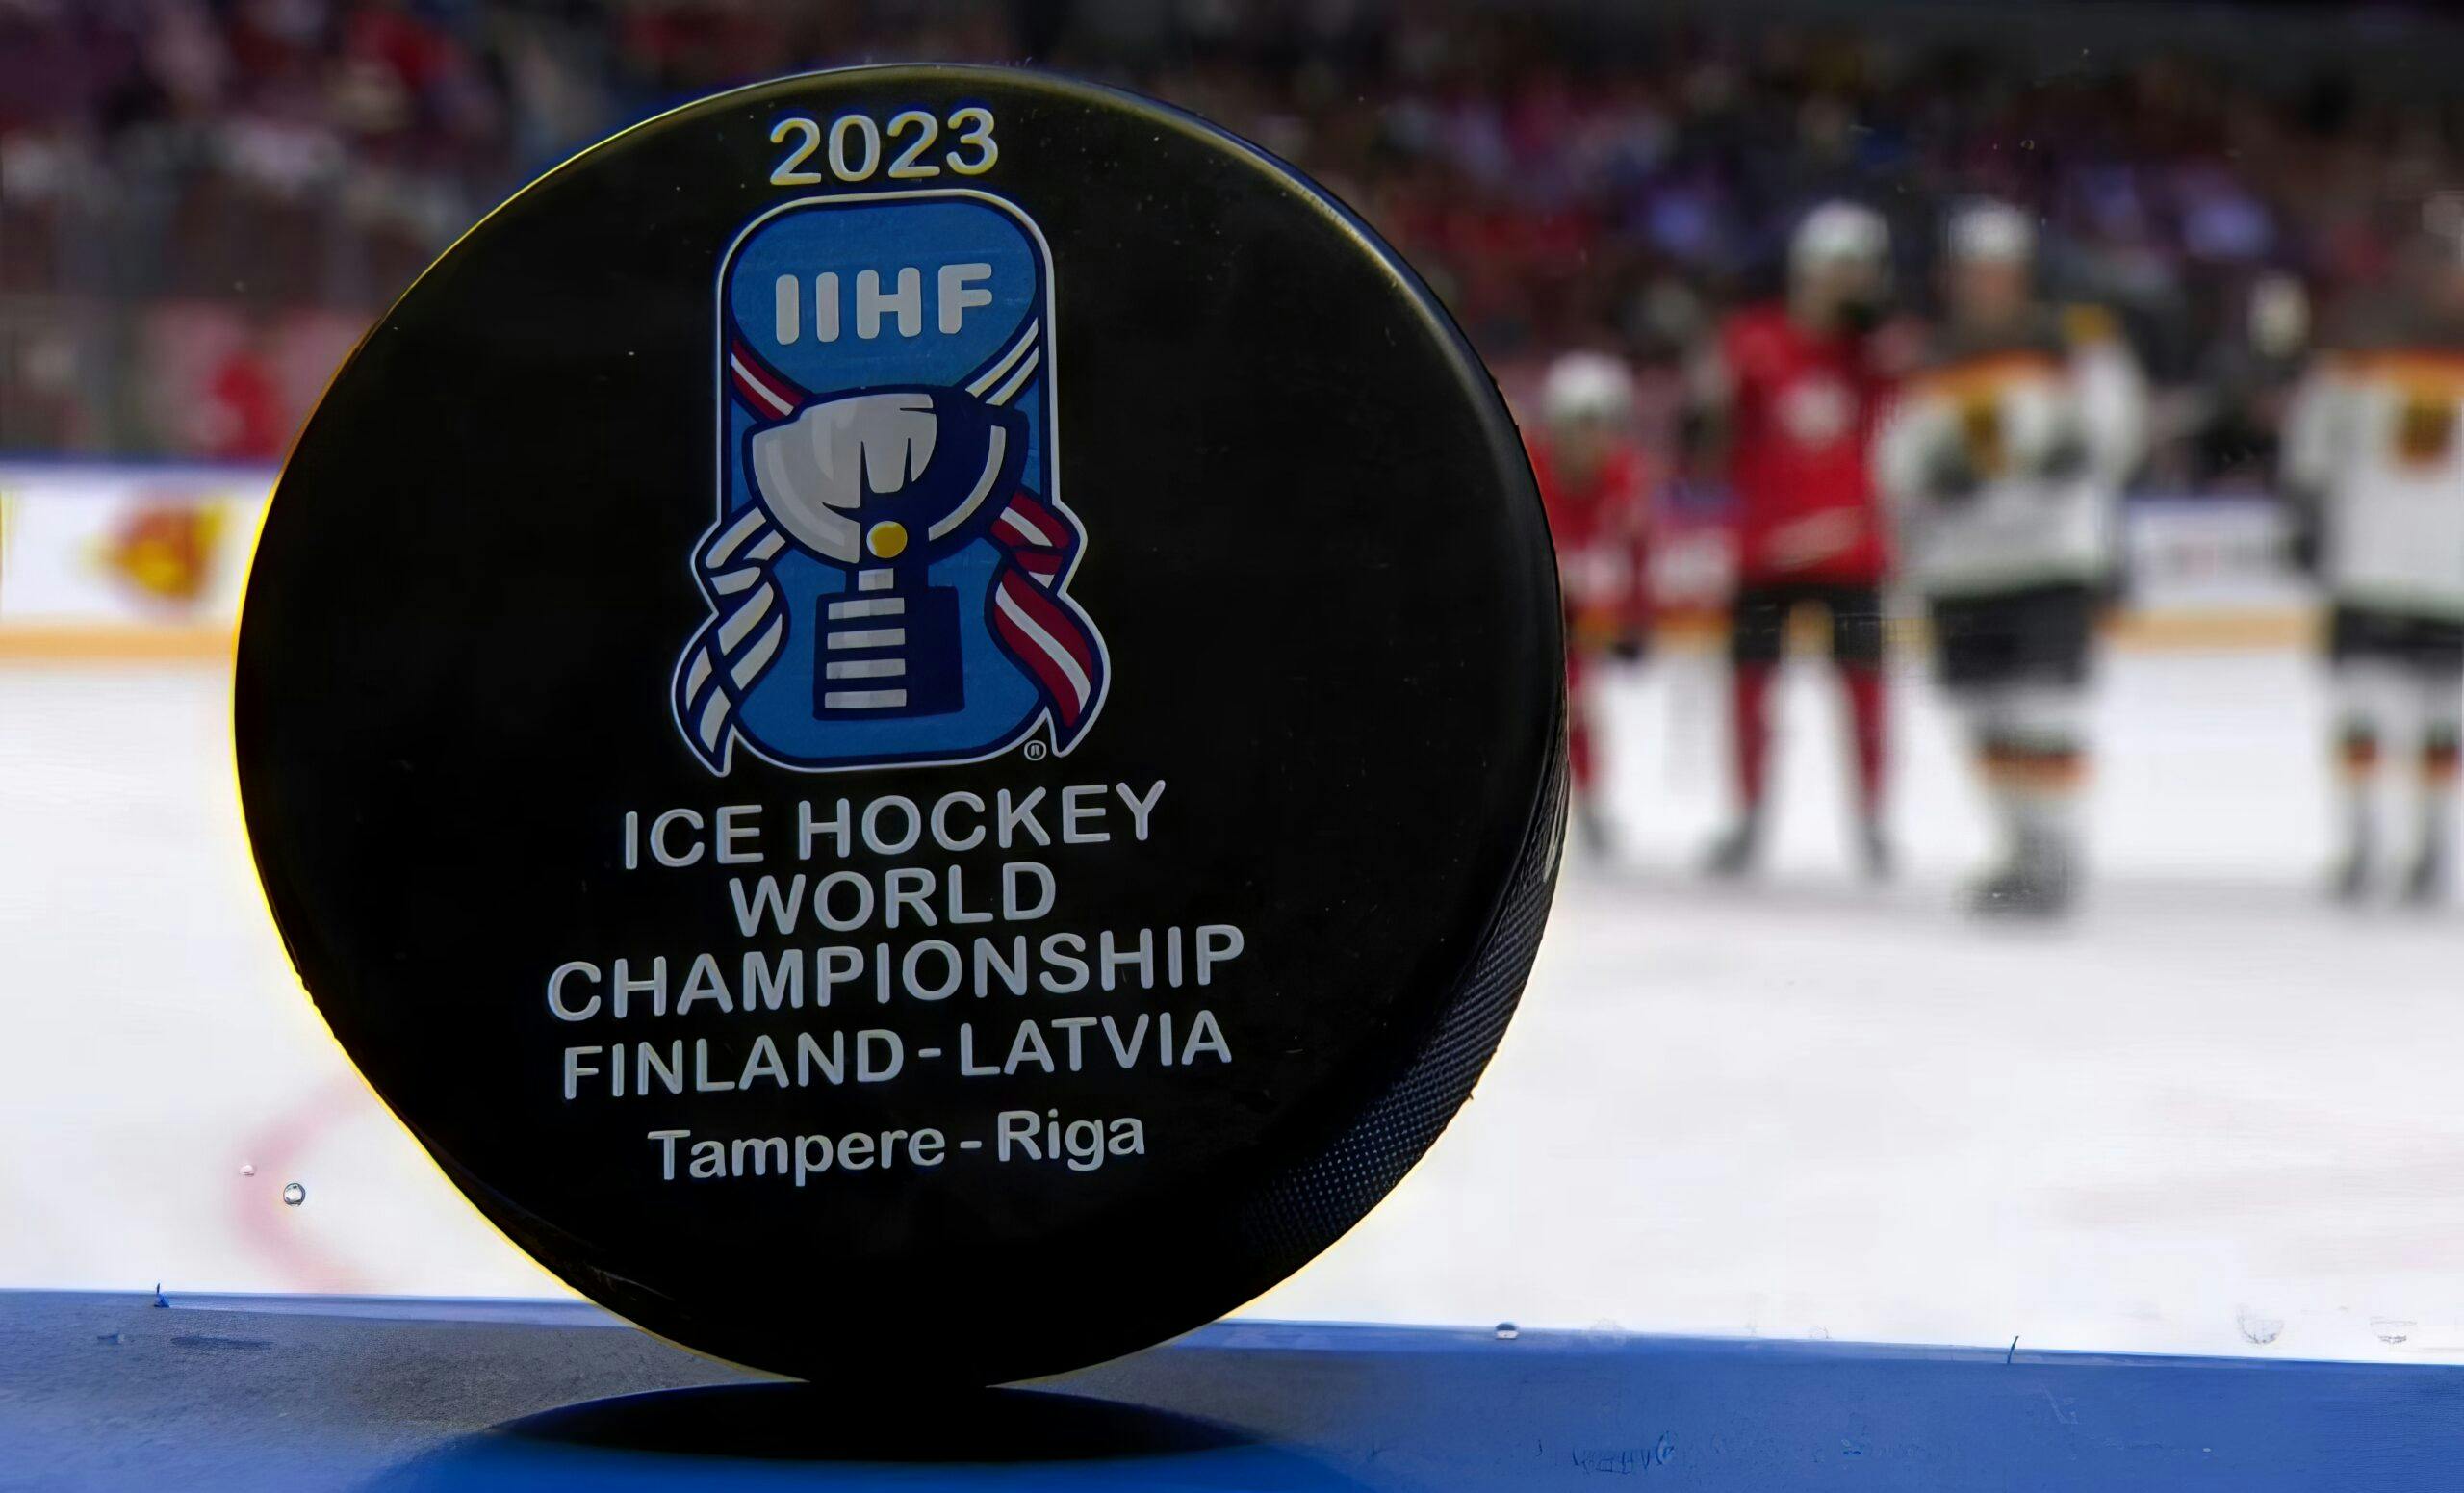 Canada, Germany to play for gold at 2023 men’s World Hockey Championship